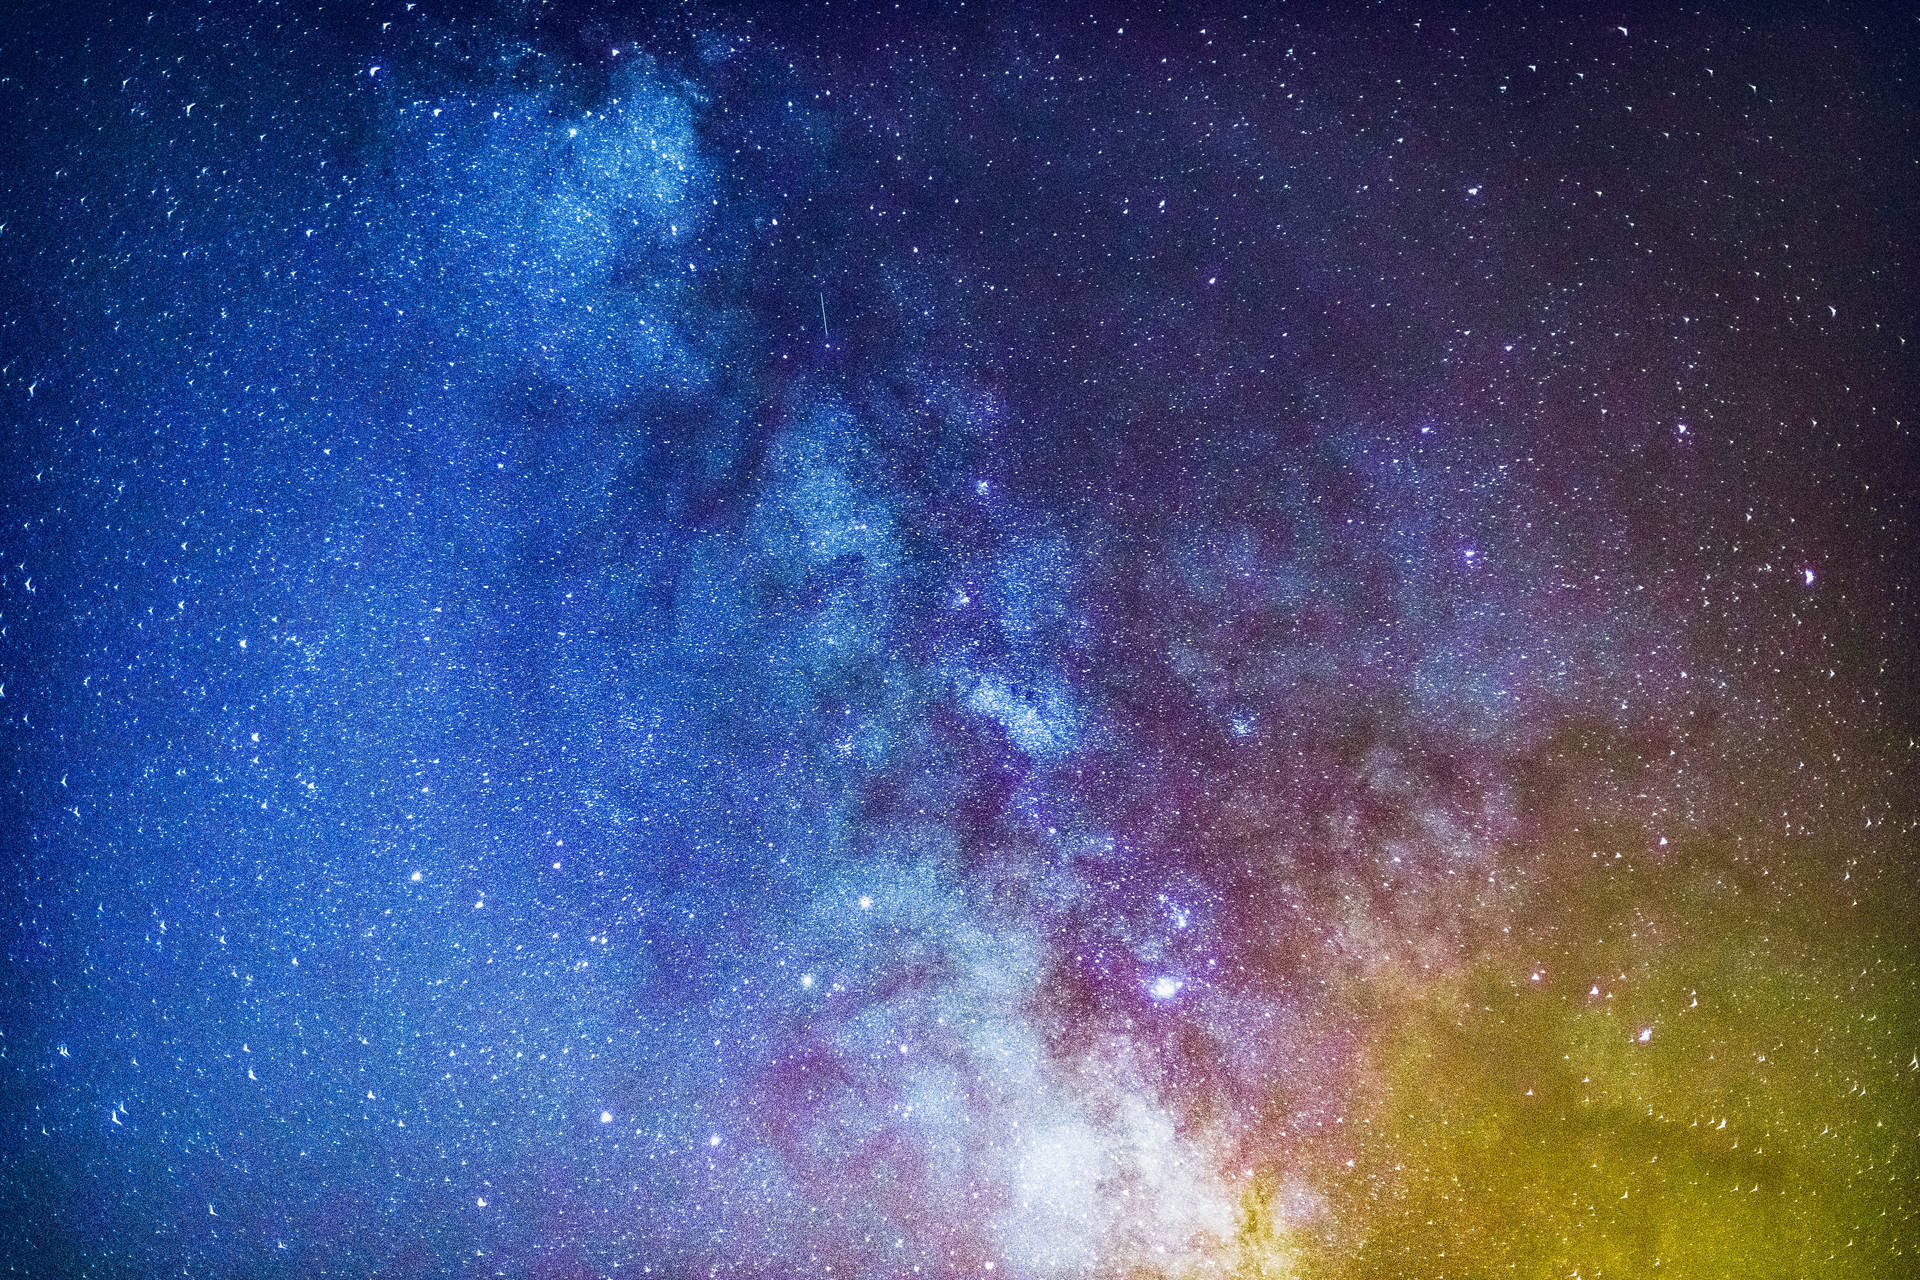 Milky Way 5447X3631 Wallpaper and Background Image